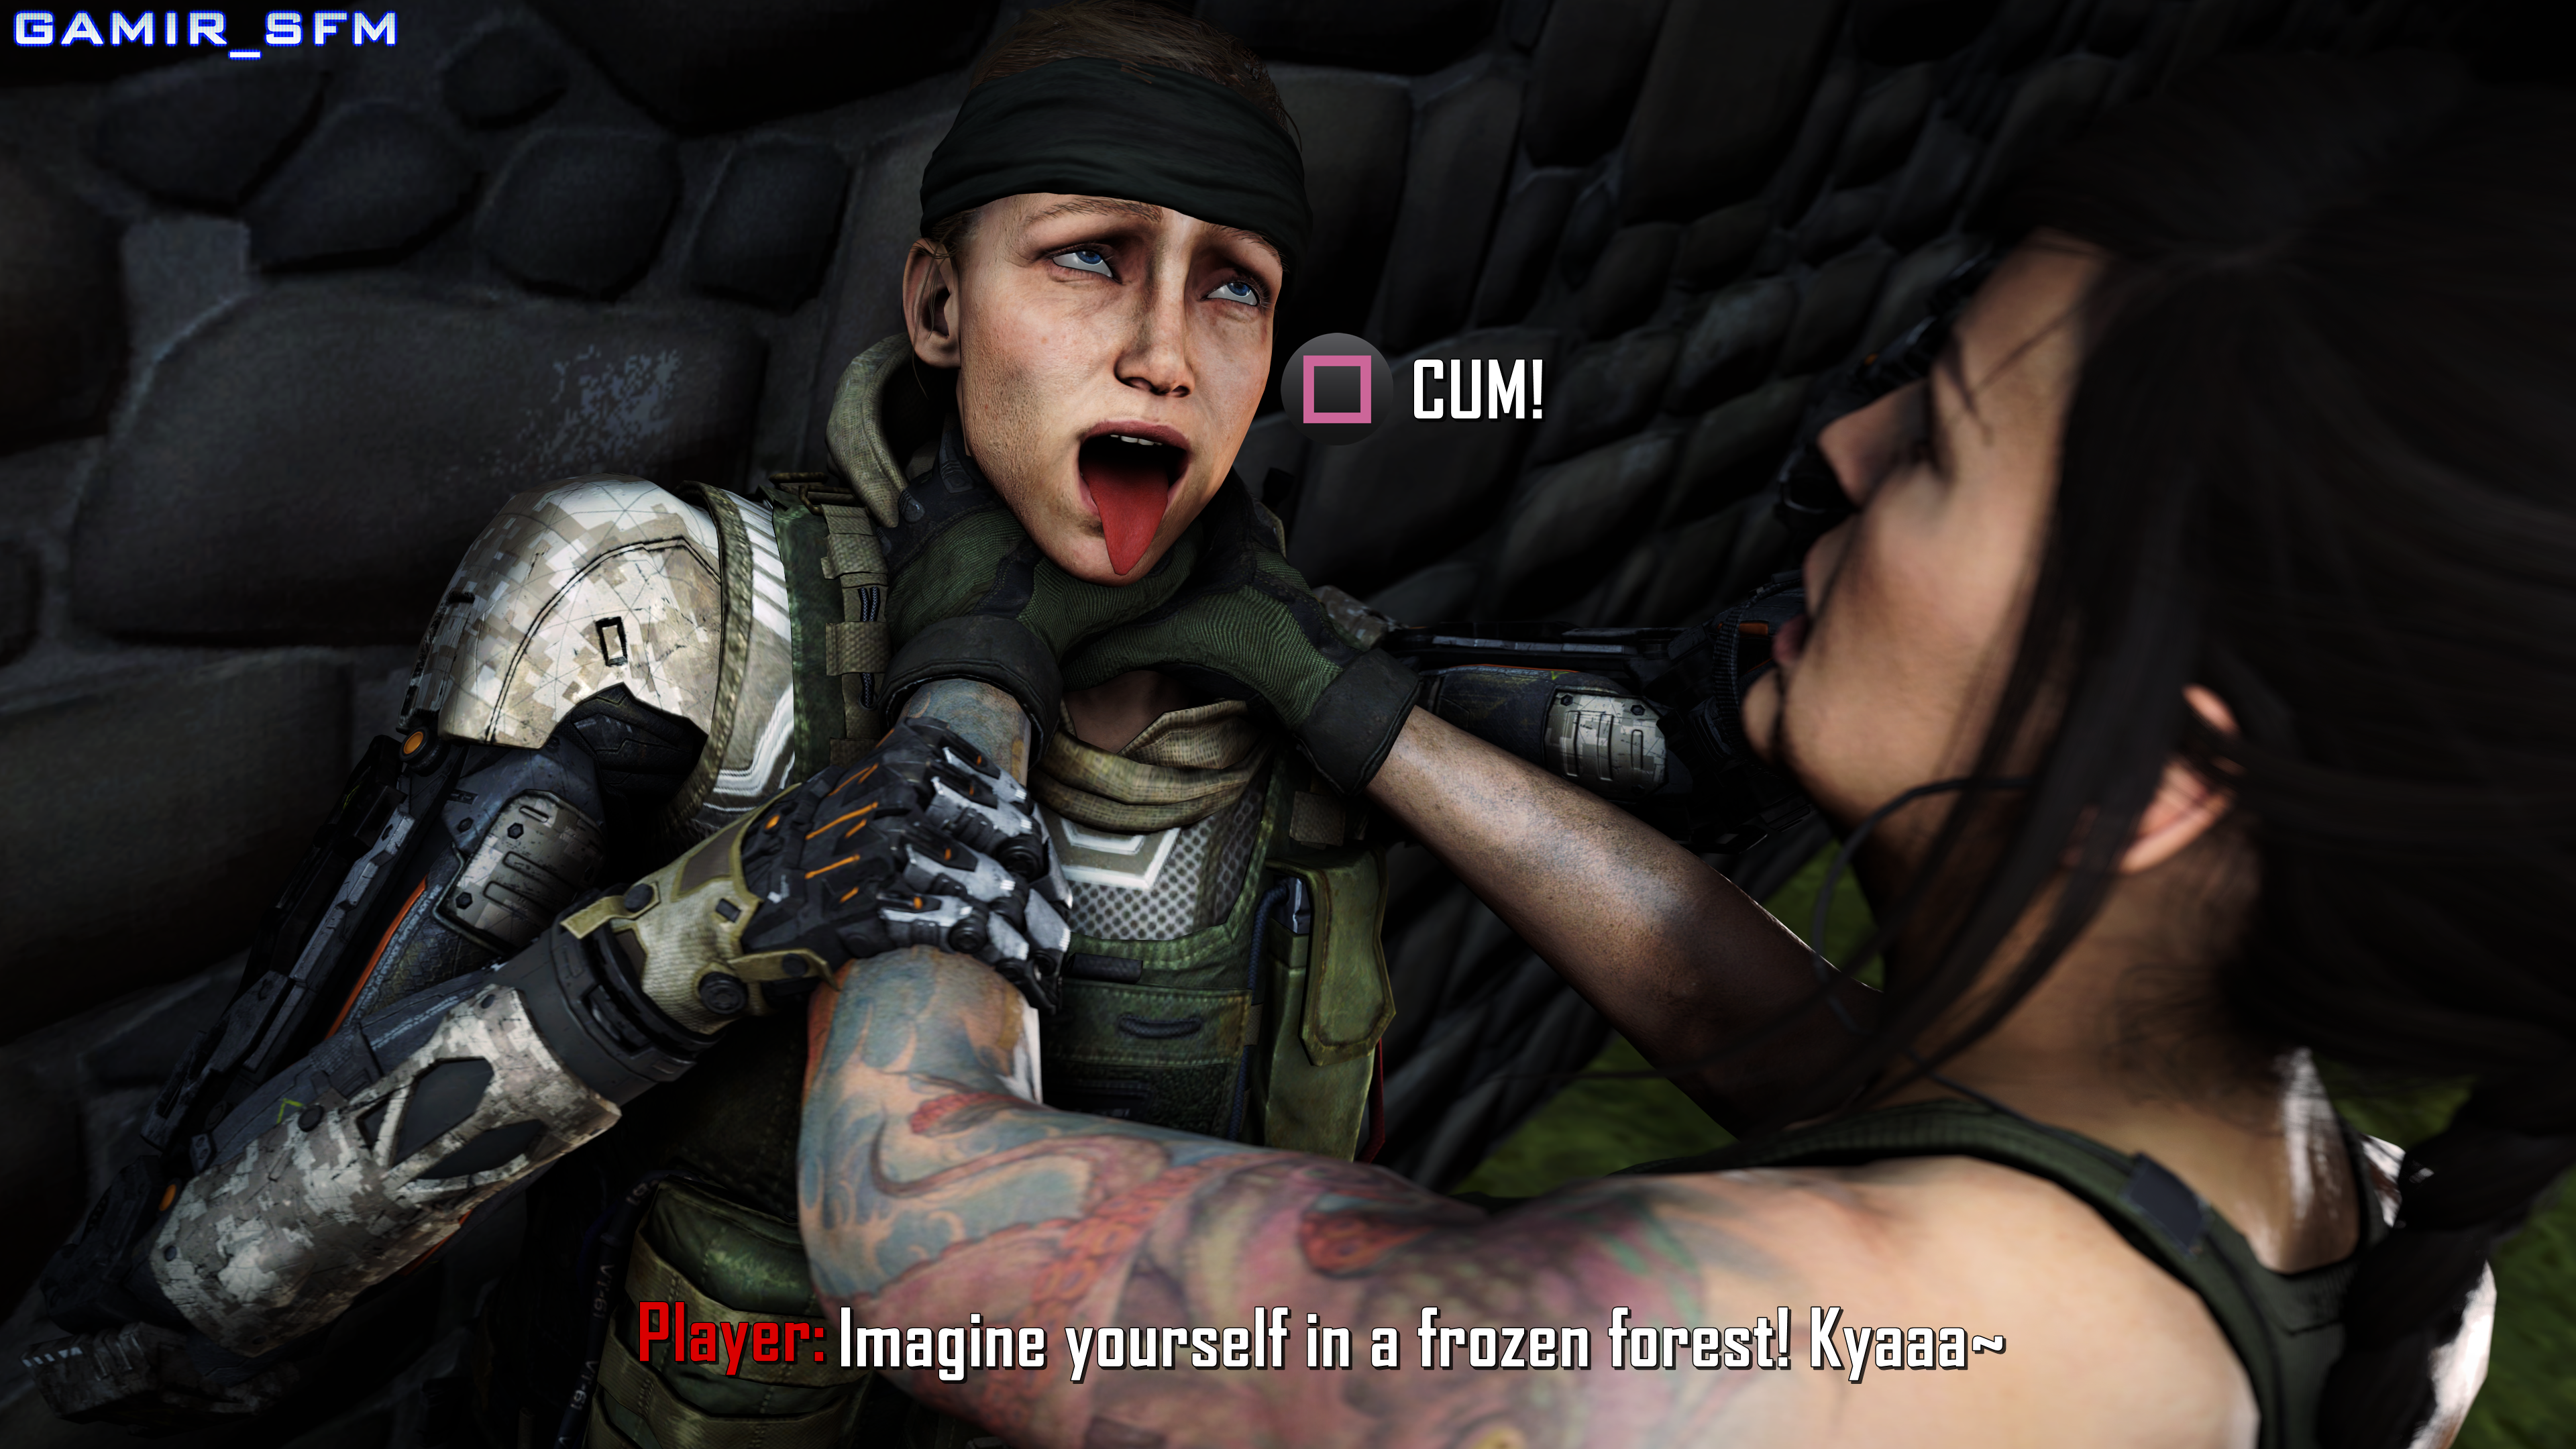 call of duty, crossover, source filmmaker, ahe gao, black ops 3, choking, f...